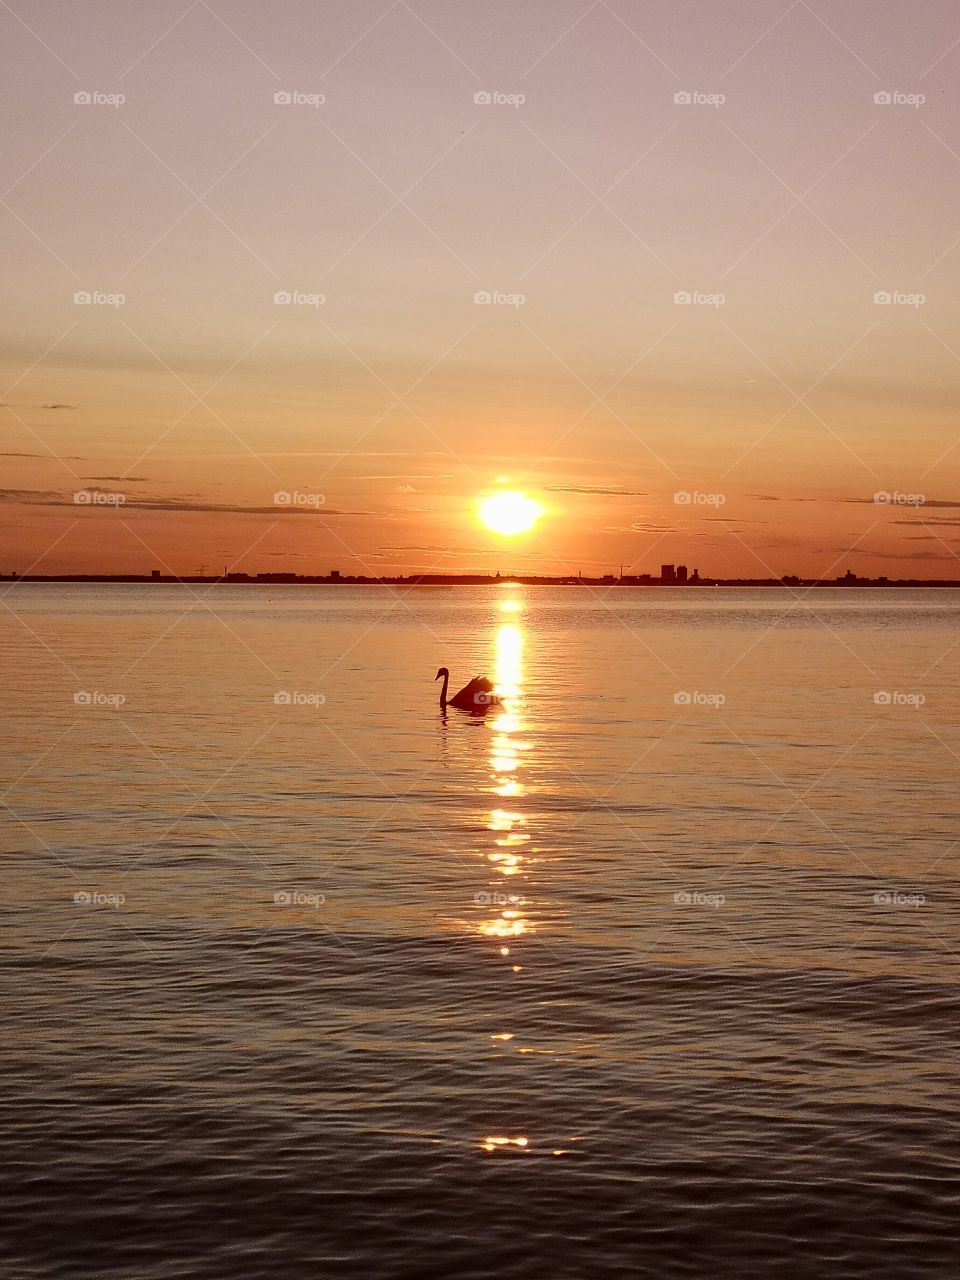 Sunset over ocean with swan